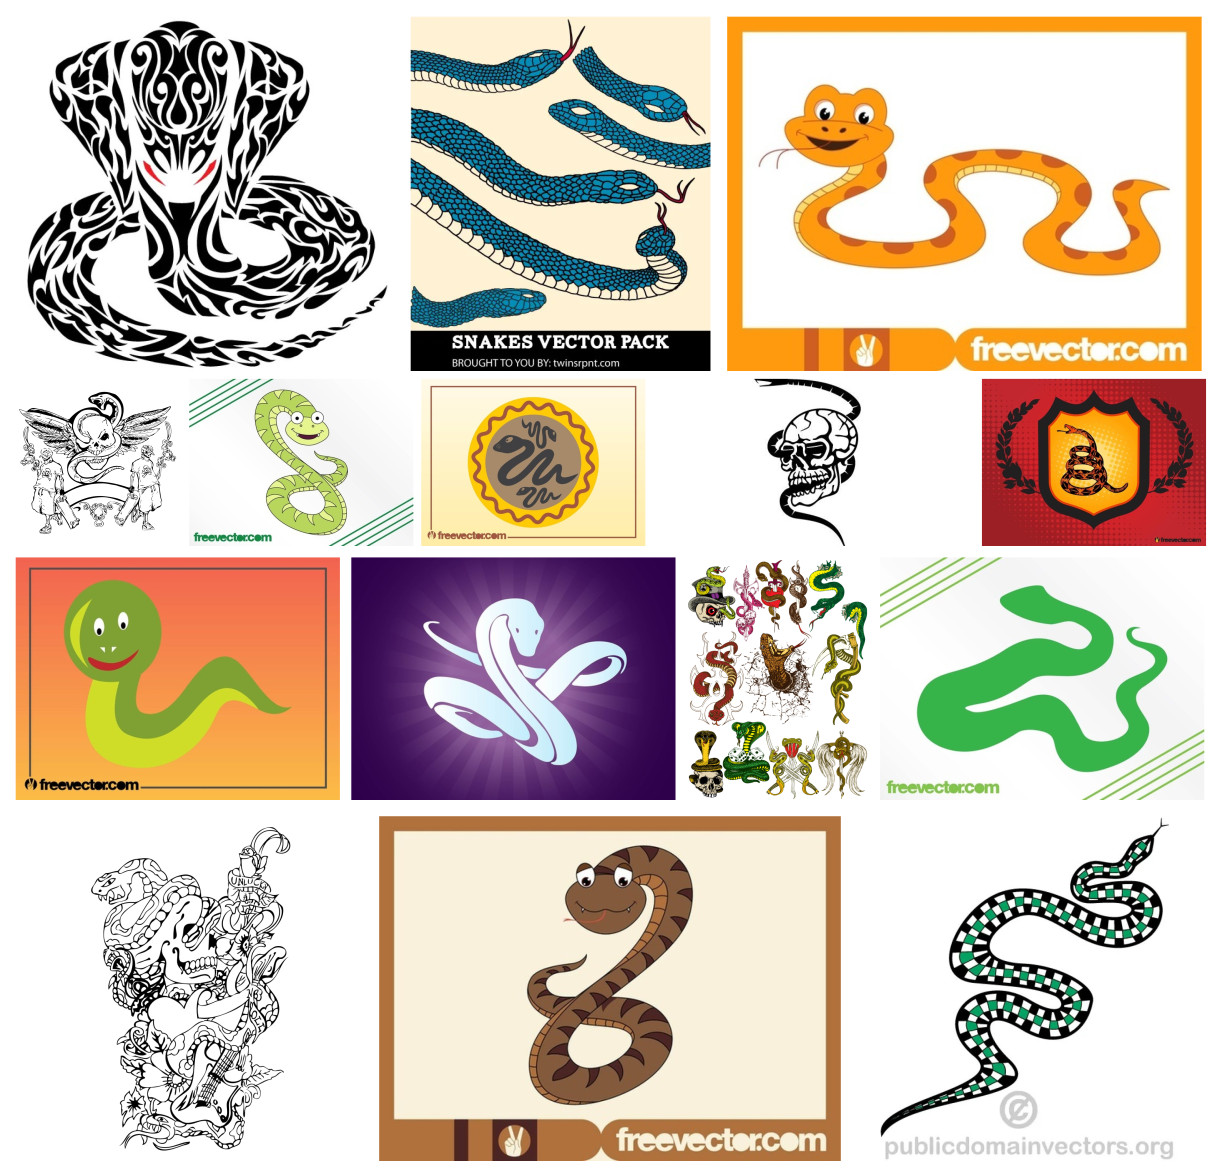 Unleash Creativity with the Versatile Snake Vector Collection